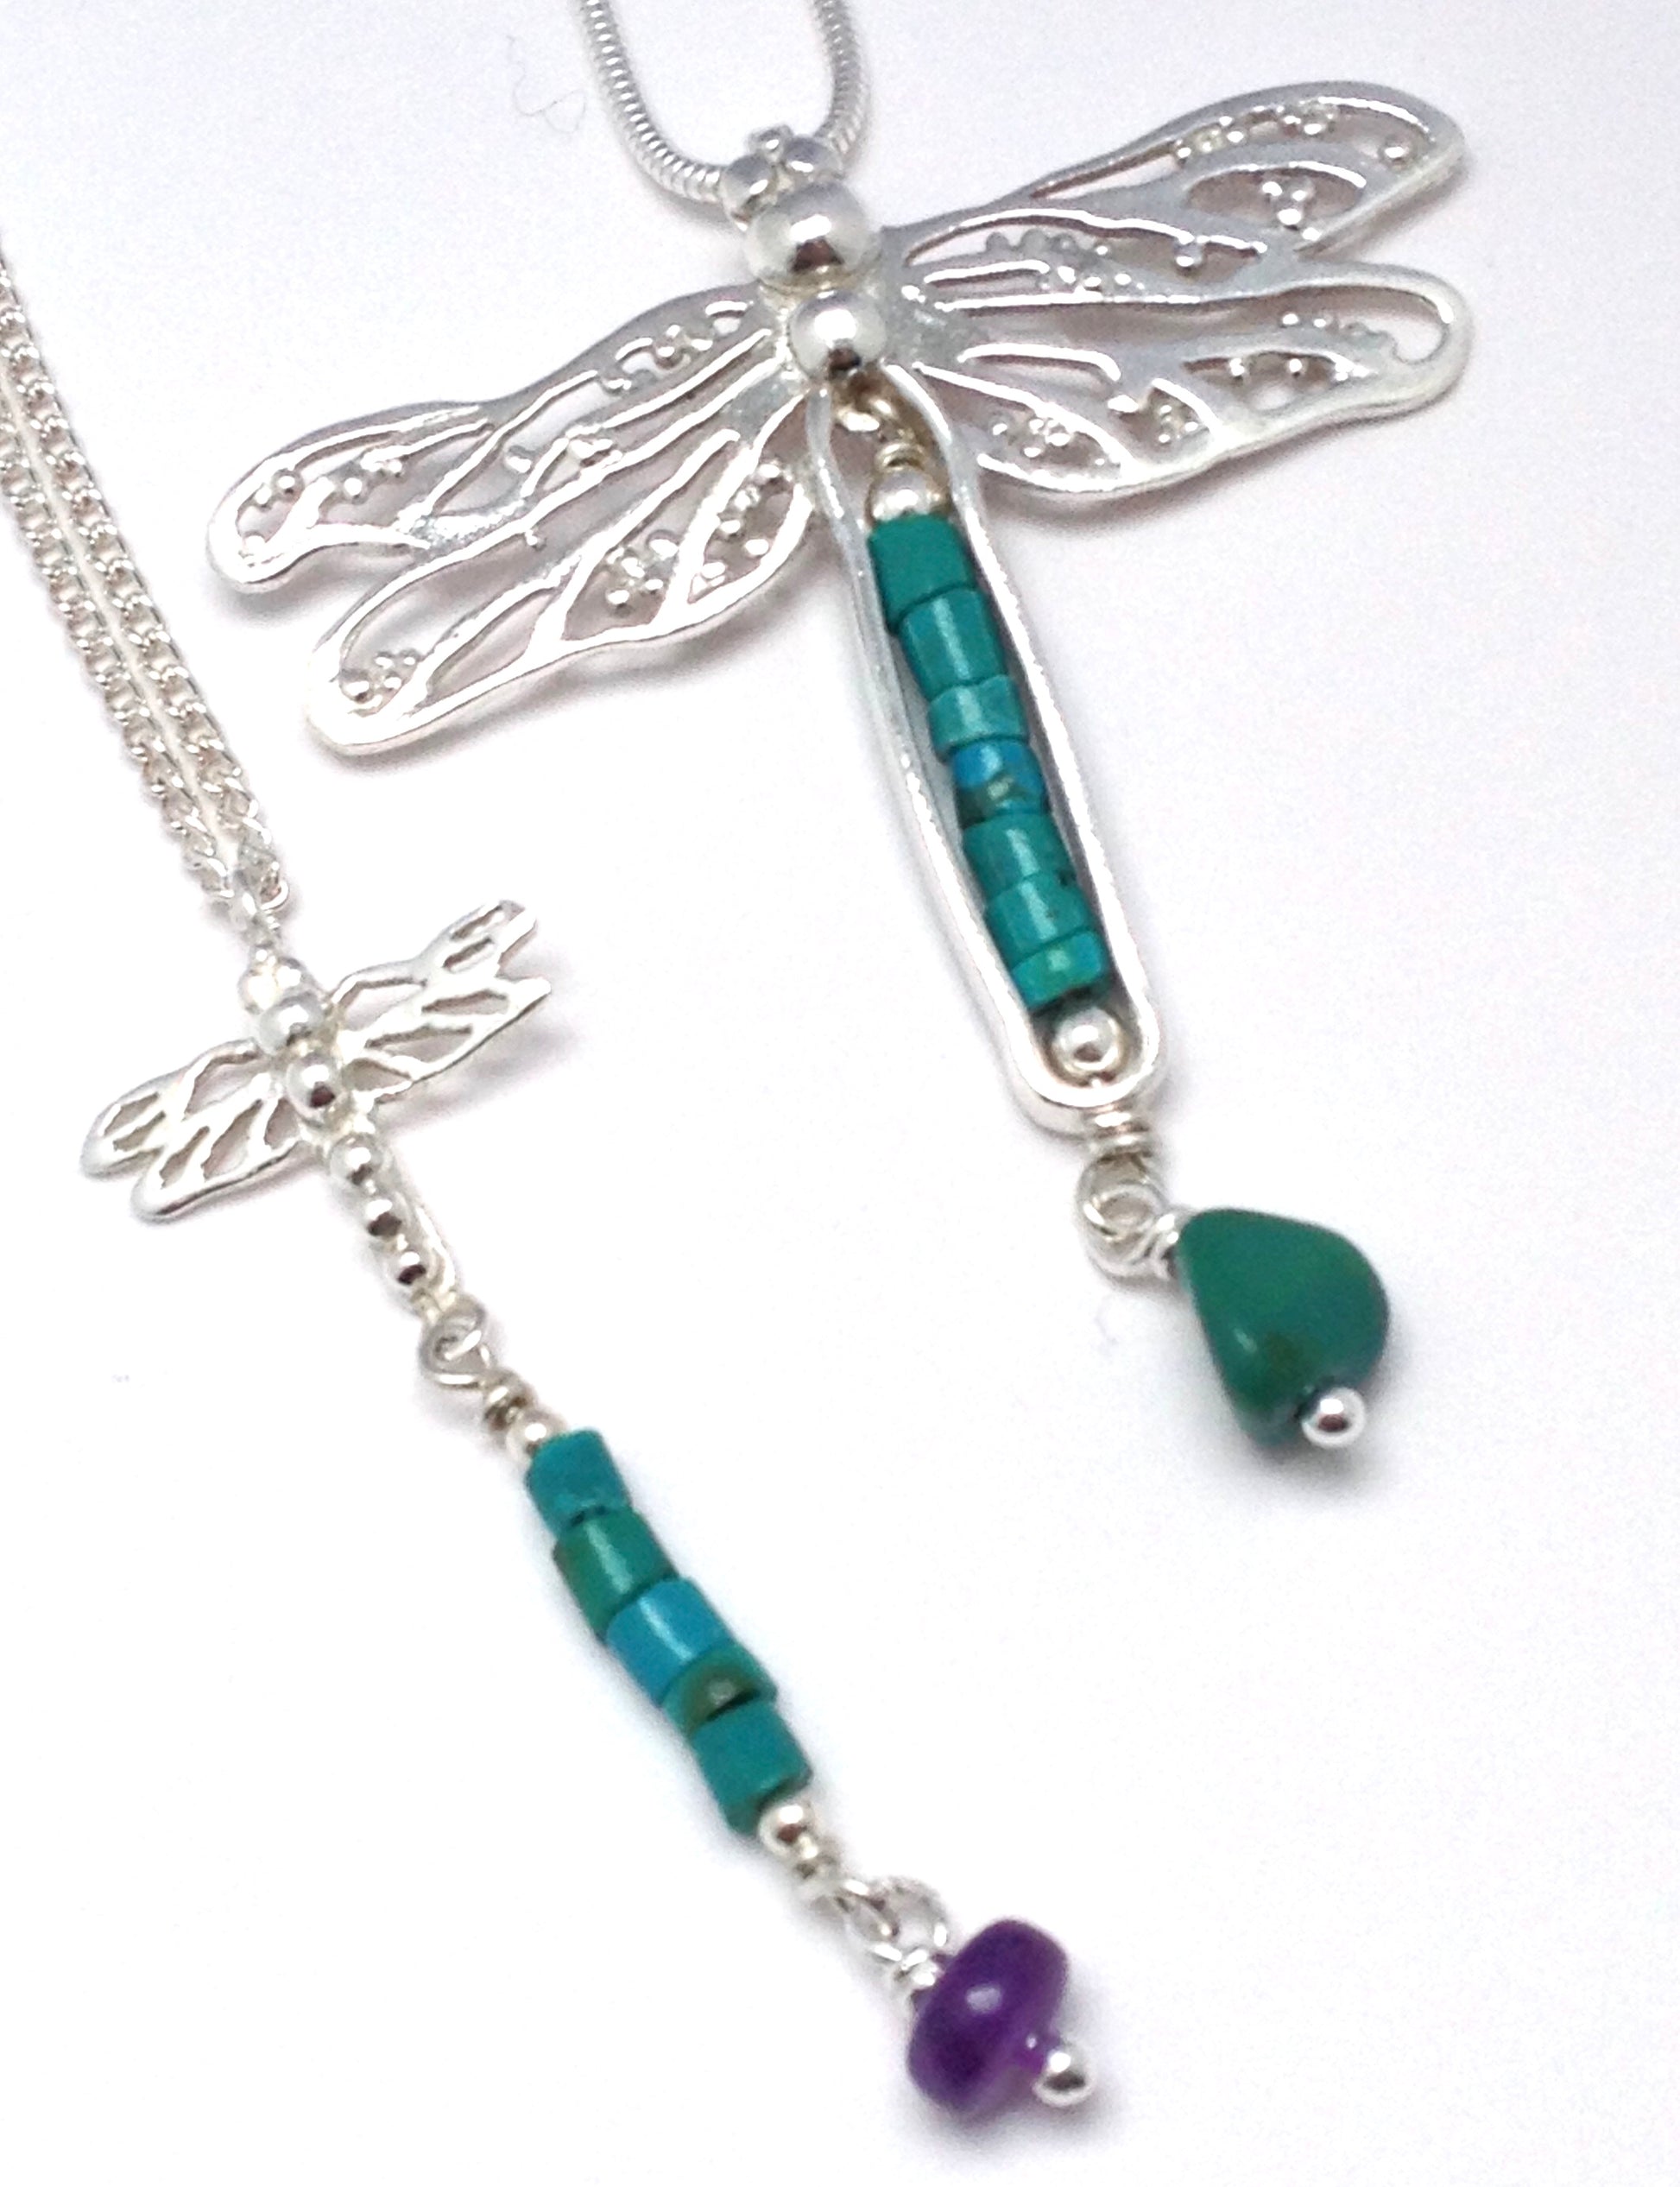 Turquoise dragonfly necklace